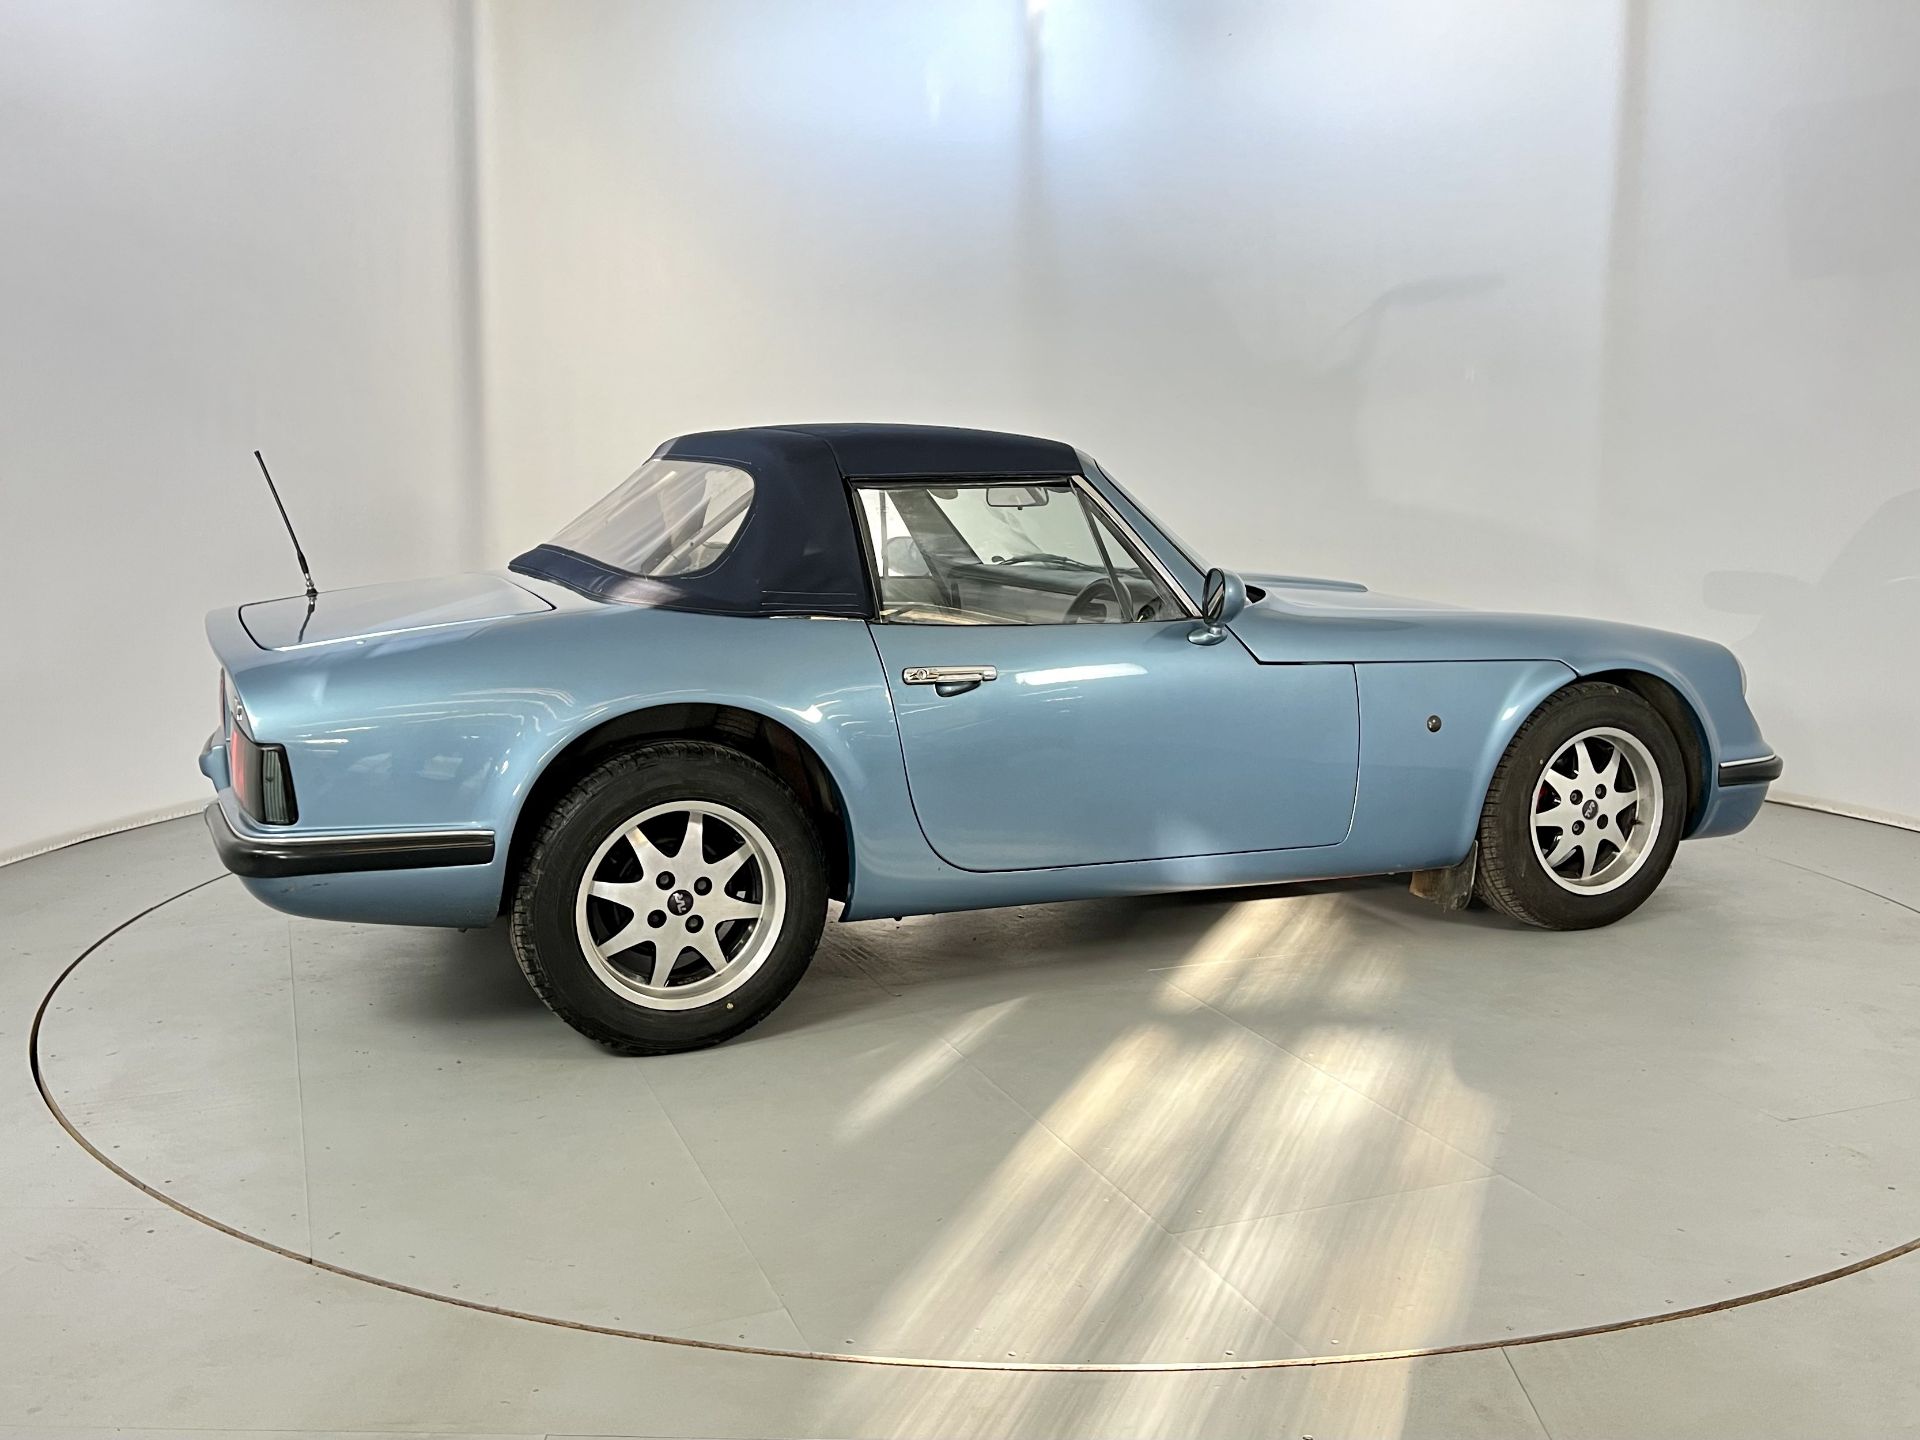 TVR S2 - Image 10 of 29